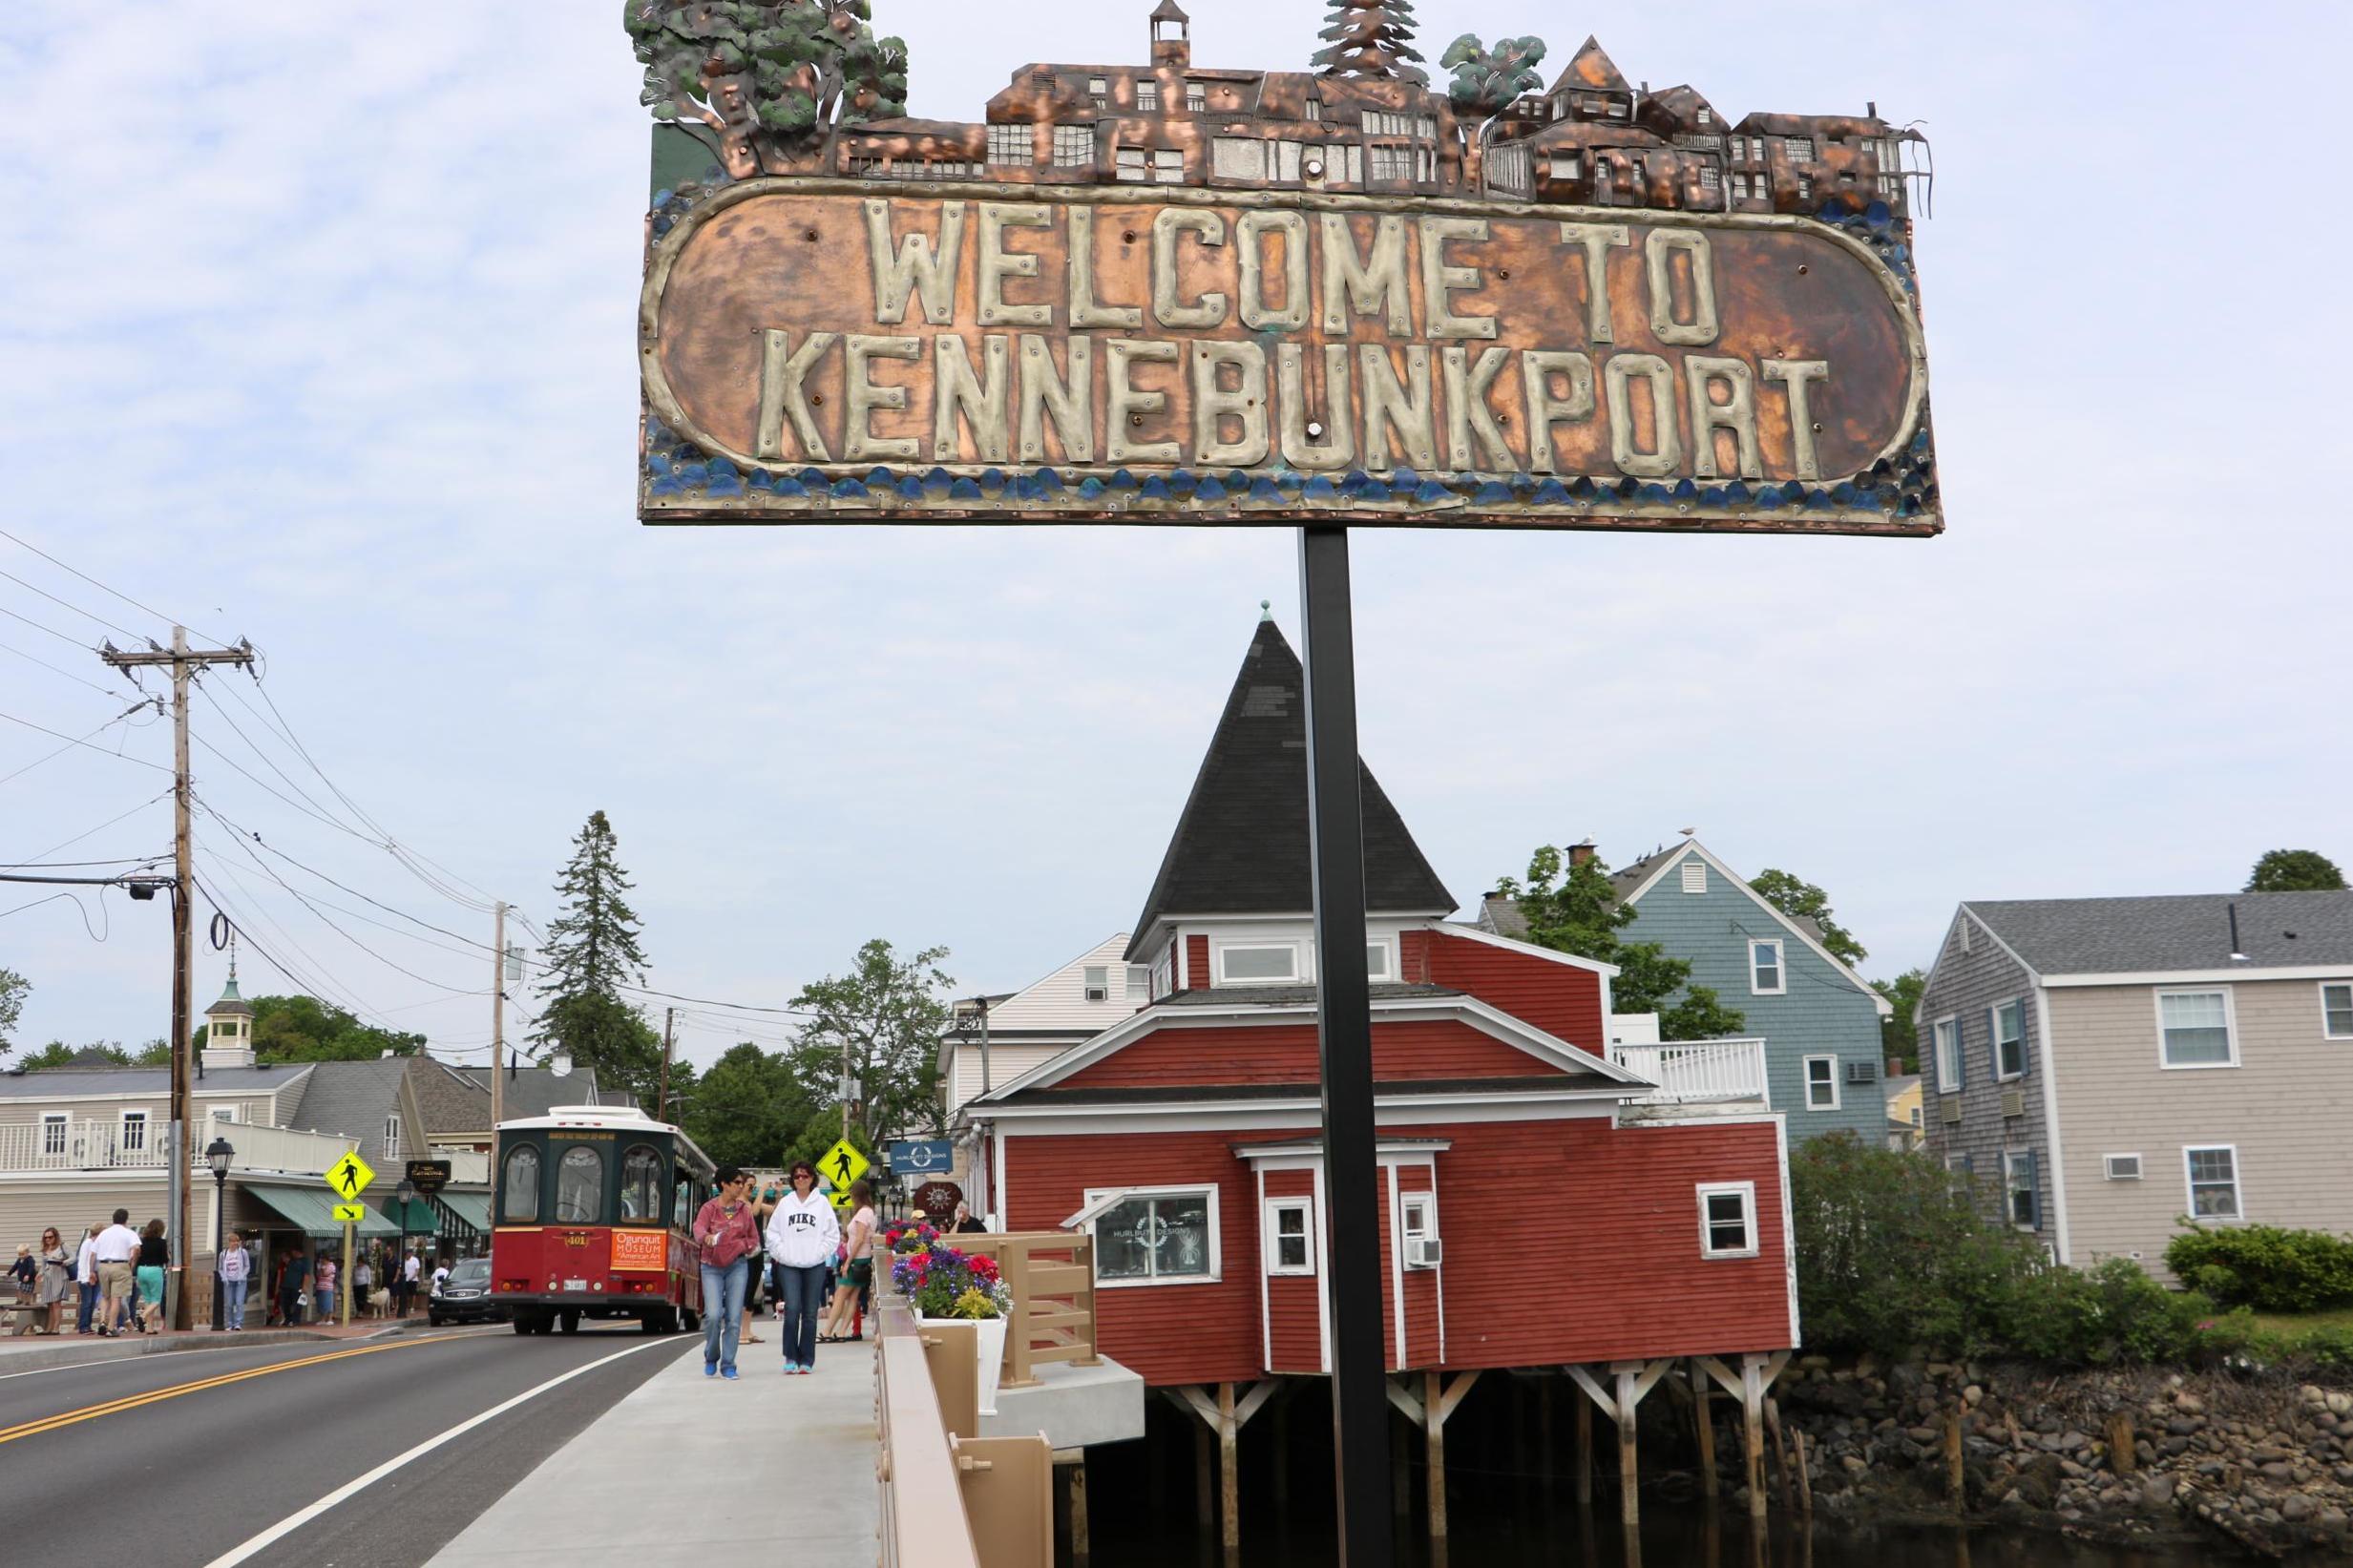 Kennebunkport prides itself on its dog-friendly aesthetic